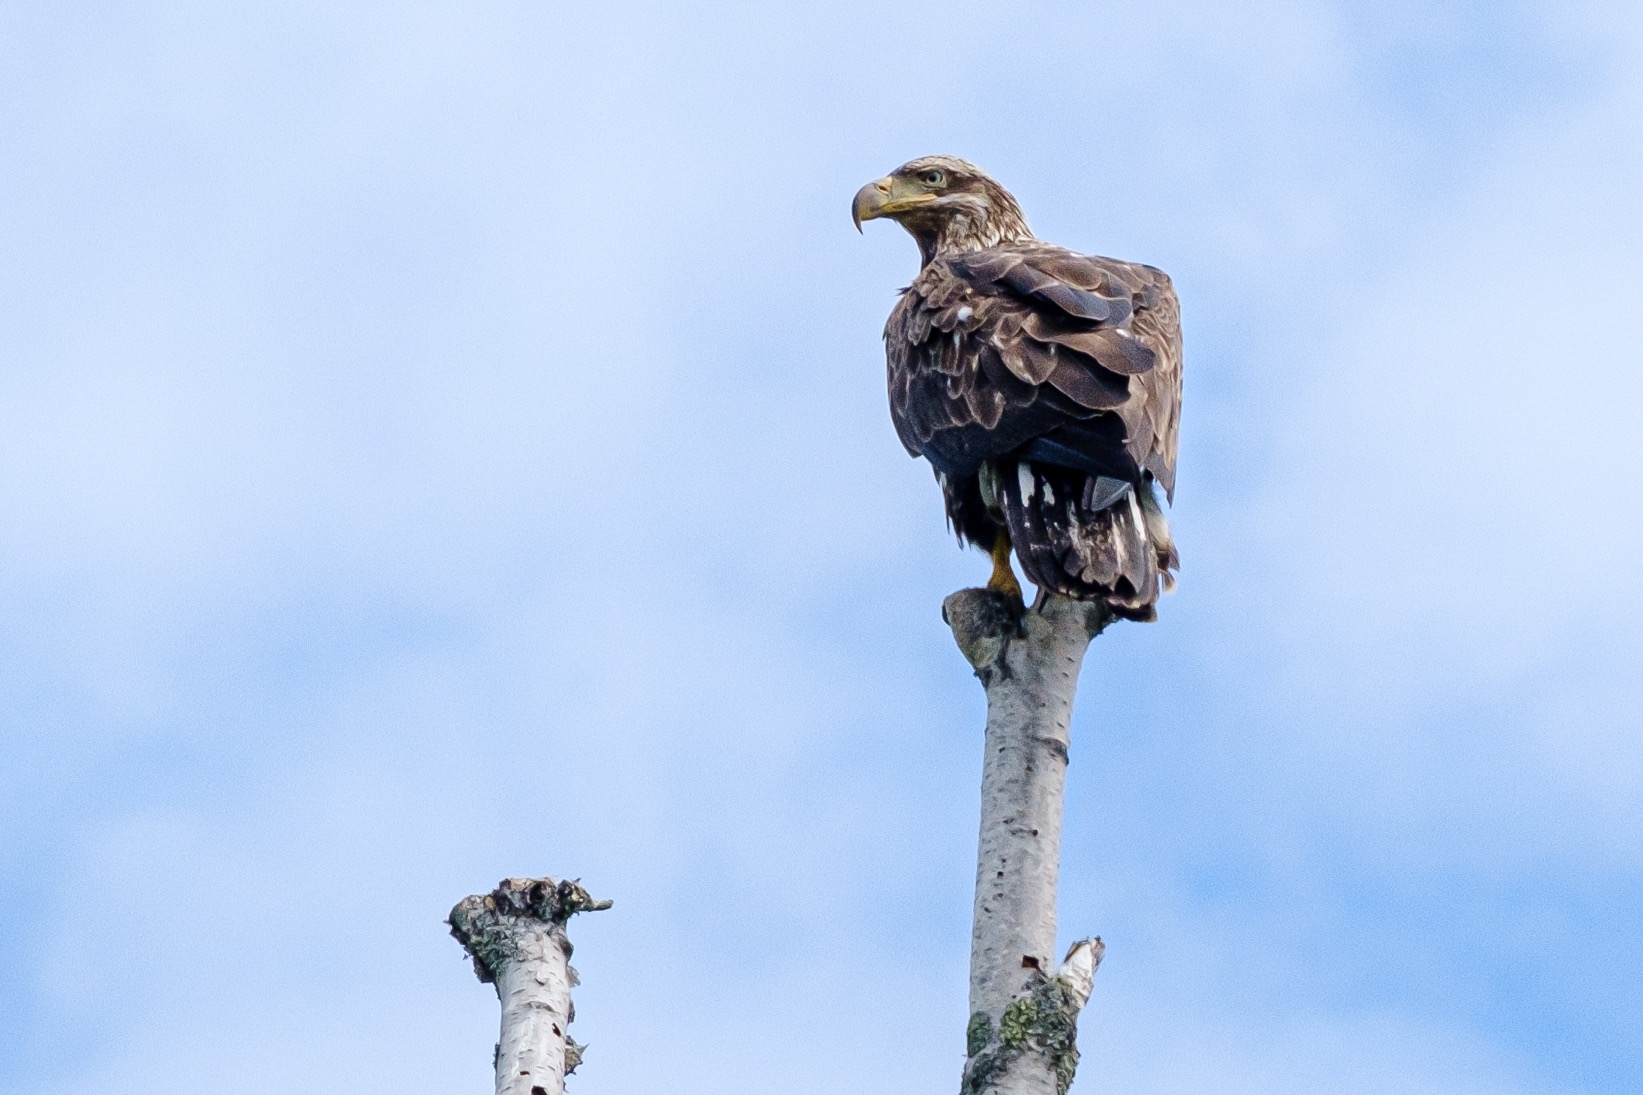  A young Bald Eagle. The Bald Eagle lives along the North Shore year round. 